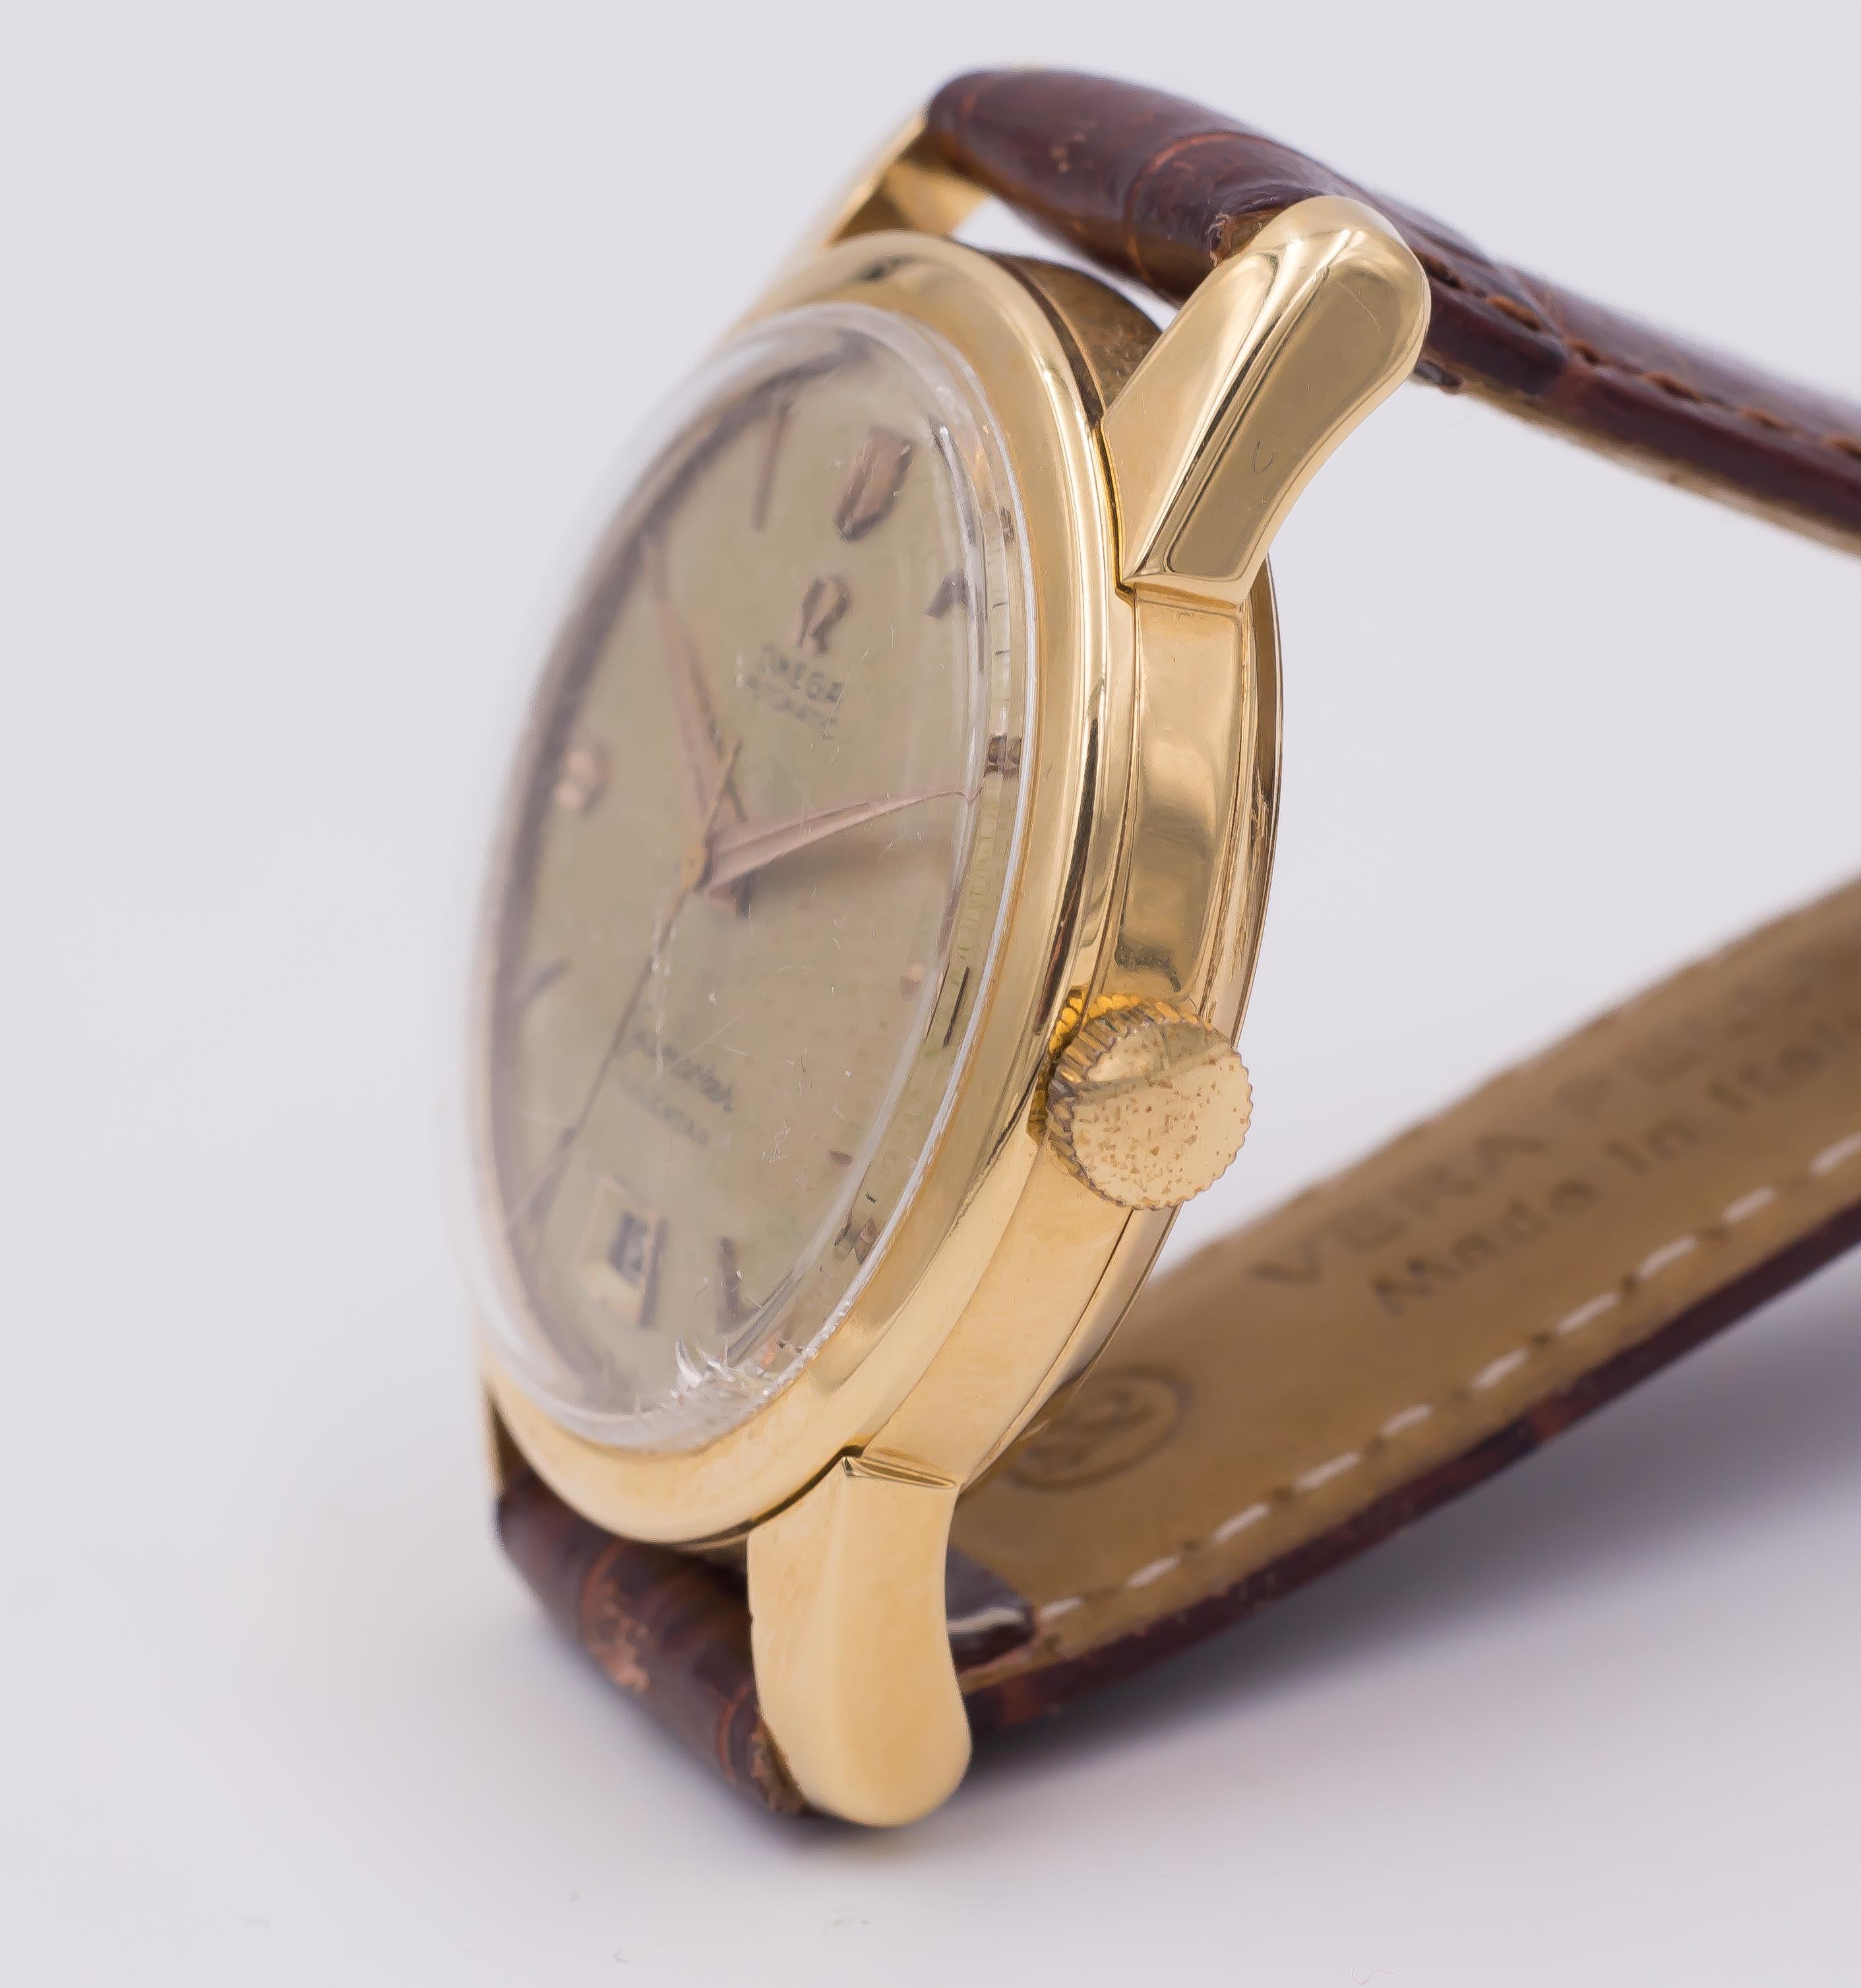 A vintage 18K gold Omega Seamaster automatic wrist watch with calendar, dating from the 1952.

Caliber: 355

BRAND
Omega (product line: Seamaster)

MATERIALS
18K gold

MEASUREMENTS
35 mm